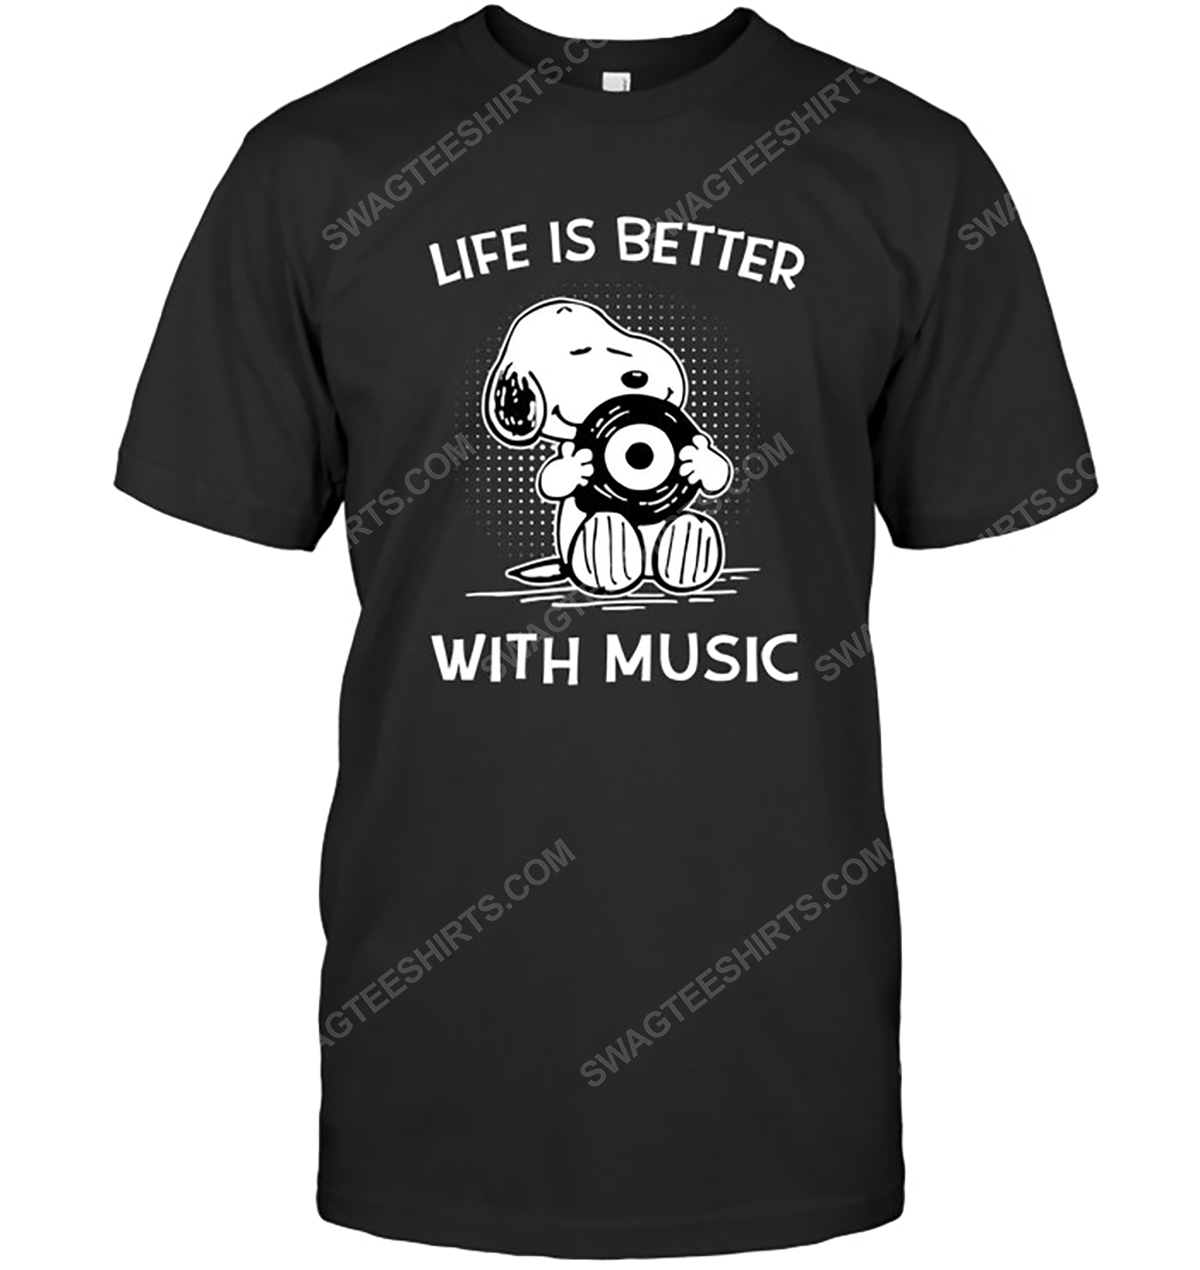 The peanuts snoopy life is better with music tshirt 1